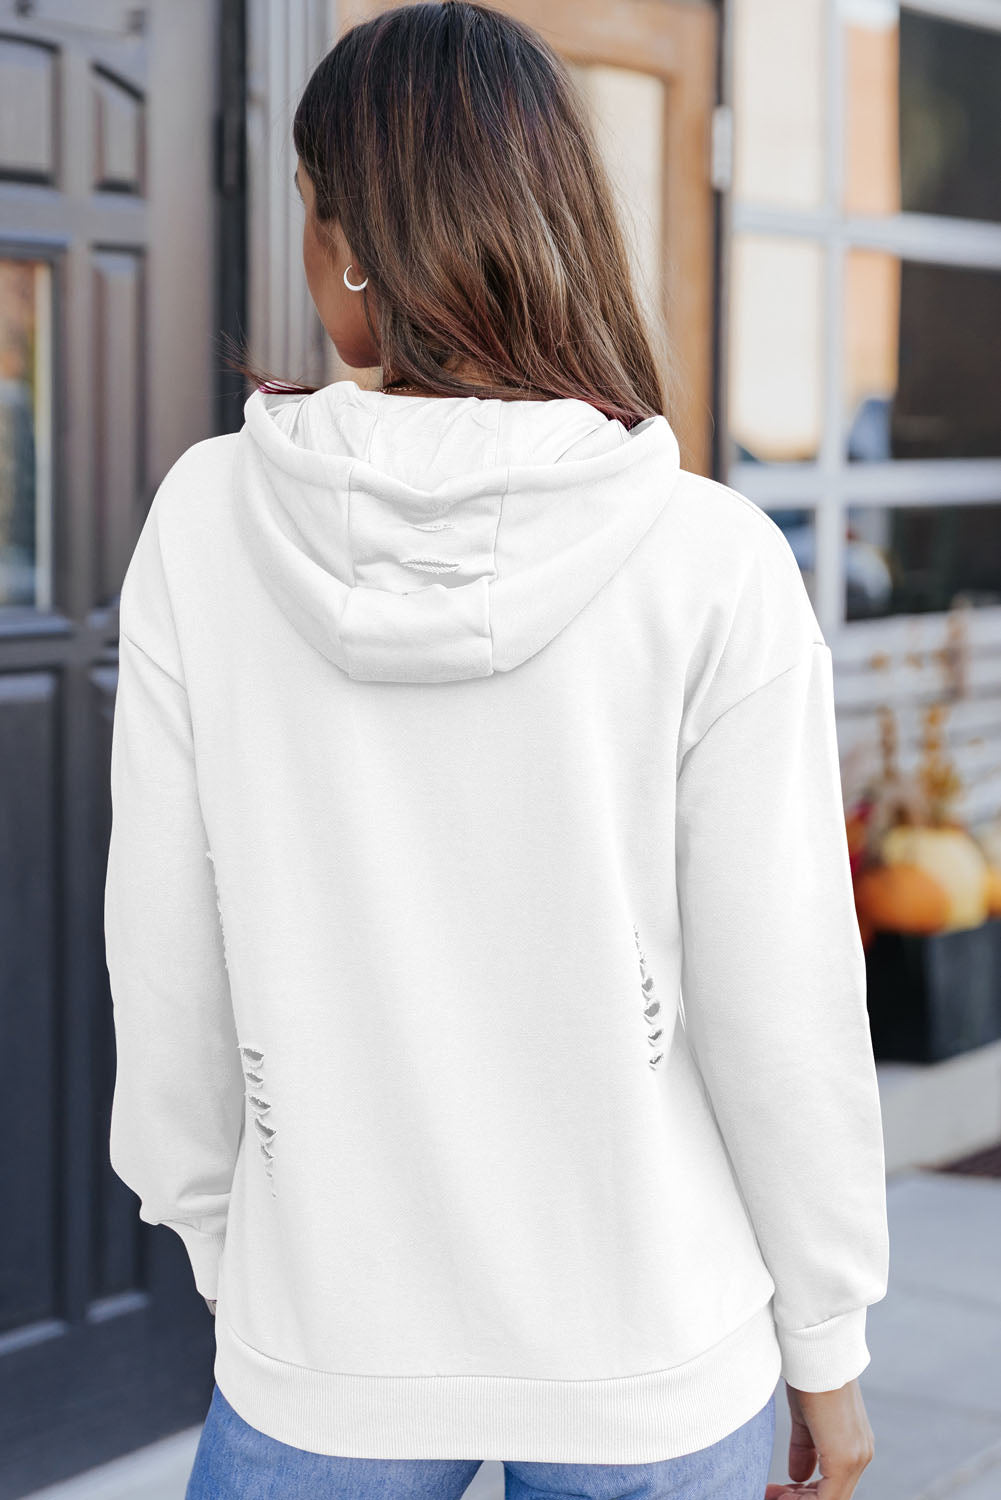 Cutout Dropped Shoulder Hoodie - Women’s Clothing & Accessories - Shirts & Tops - 6 - 2024